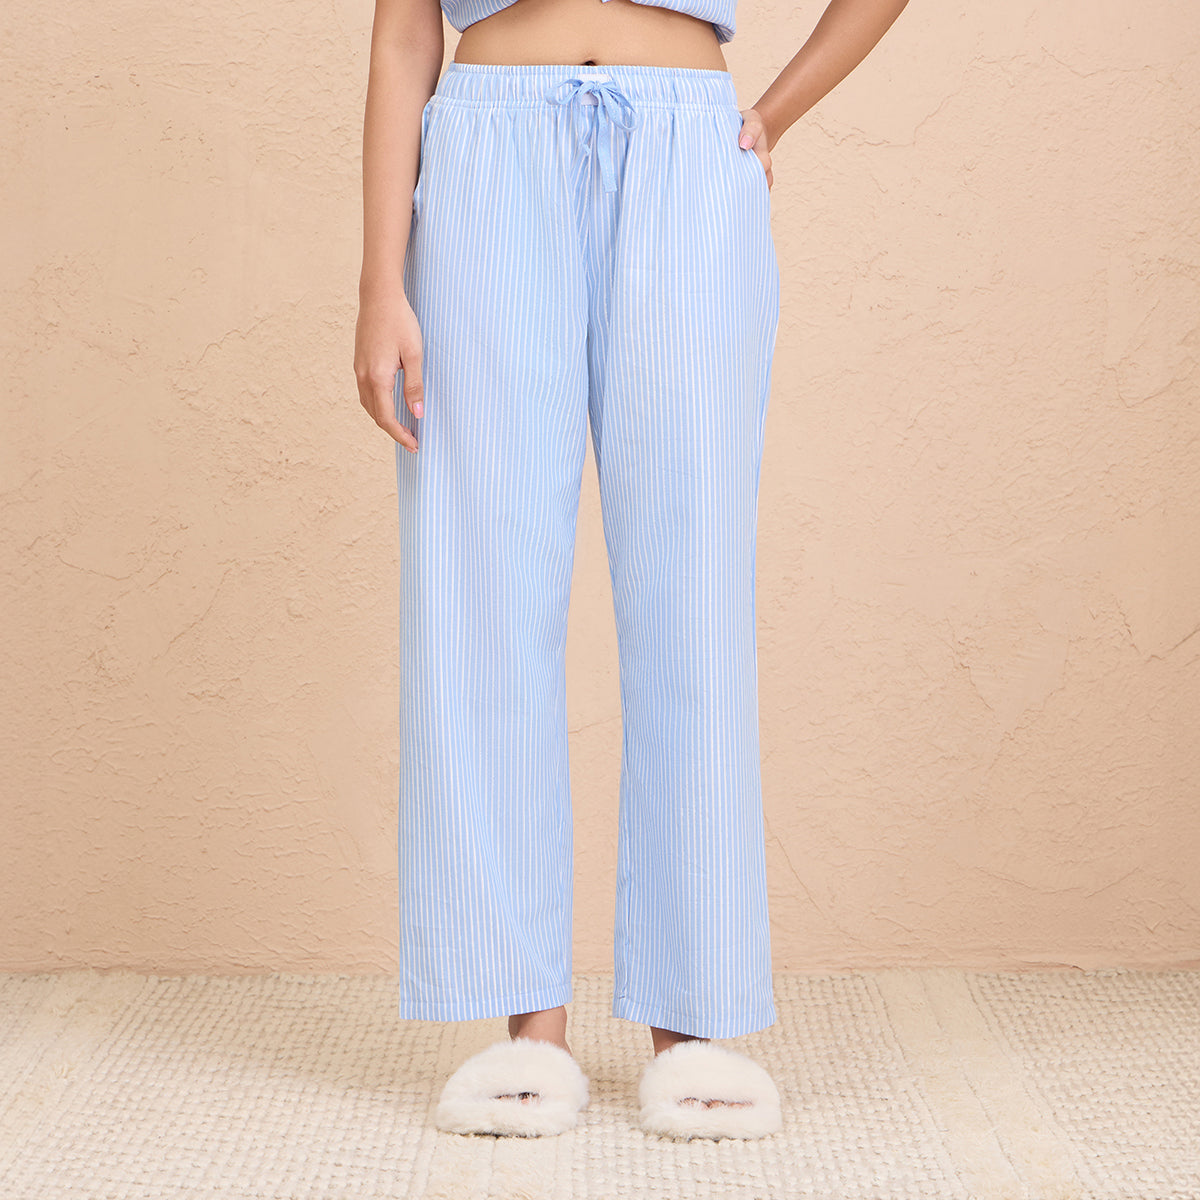 Nykd By Nykaa Super Comfy Cotton Relax Fit Pajama-NYS141-Blue Stripe